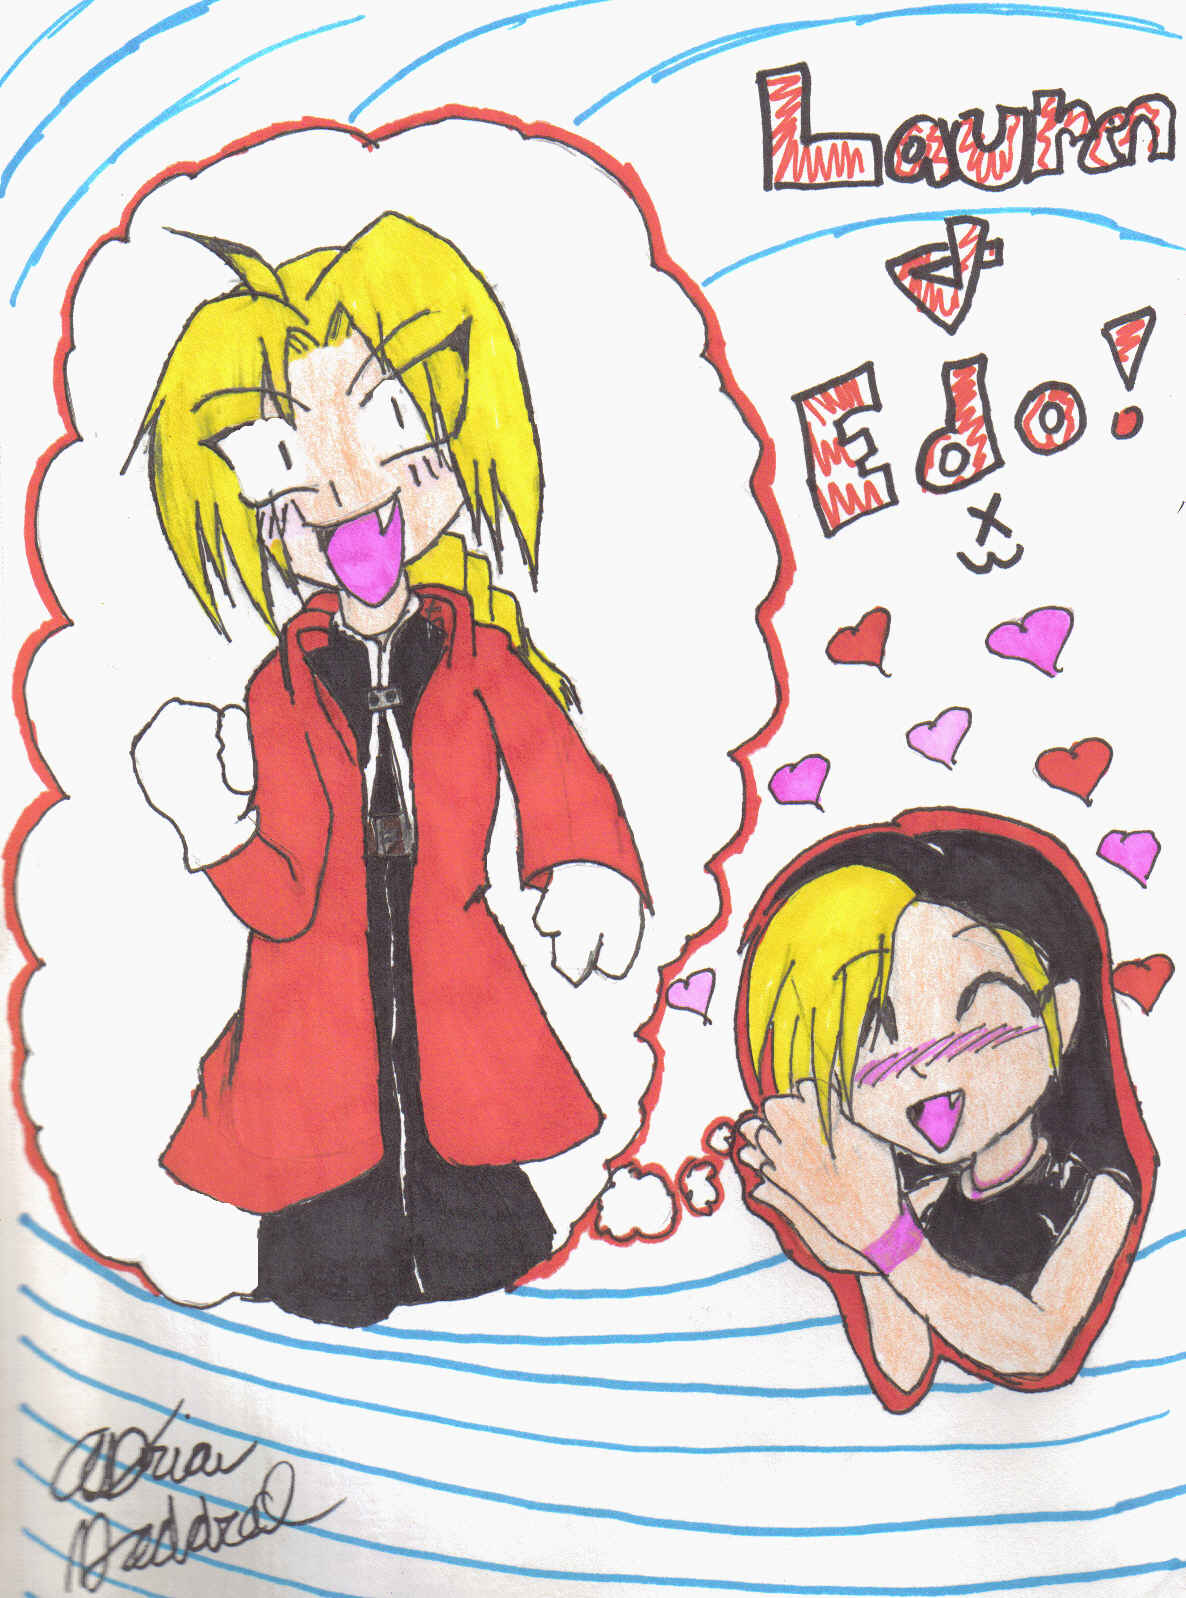 Edward Elric and Friend by NarakusSlaveandLover